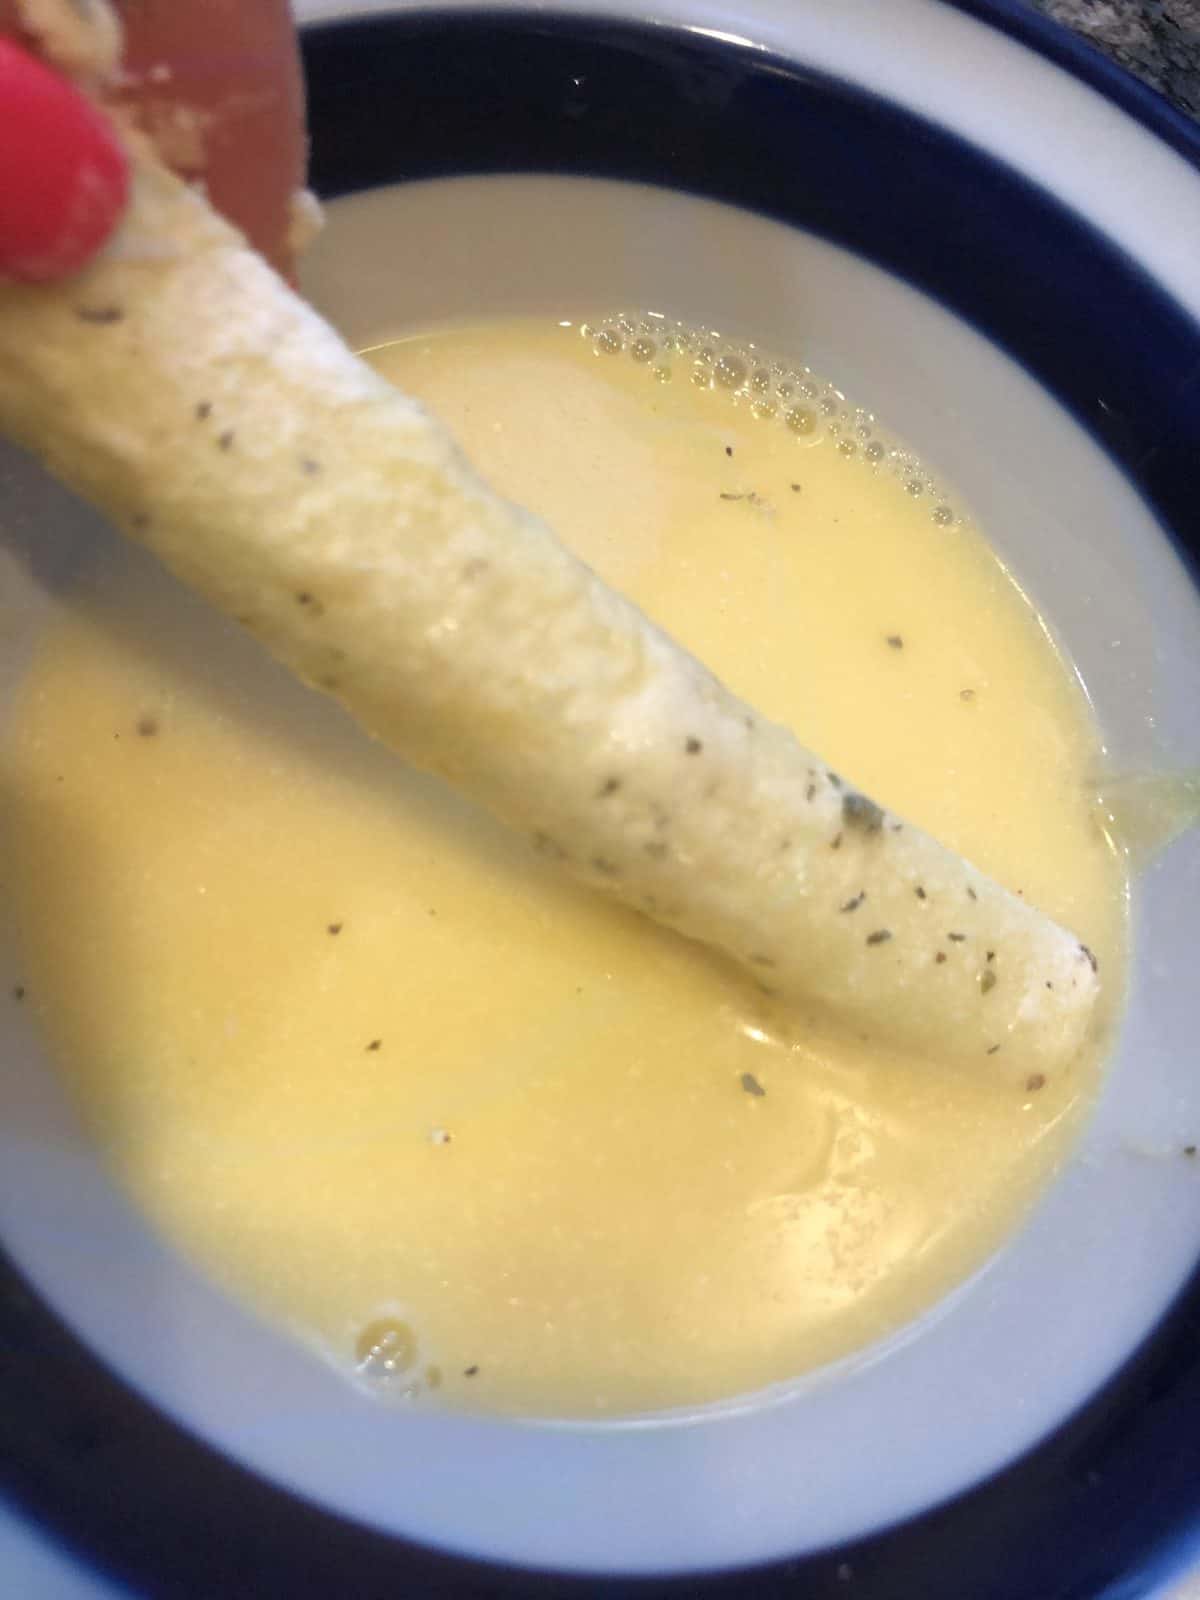 Battering cheese sticks in coconut flour and egg in a white and blue bowl